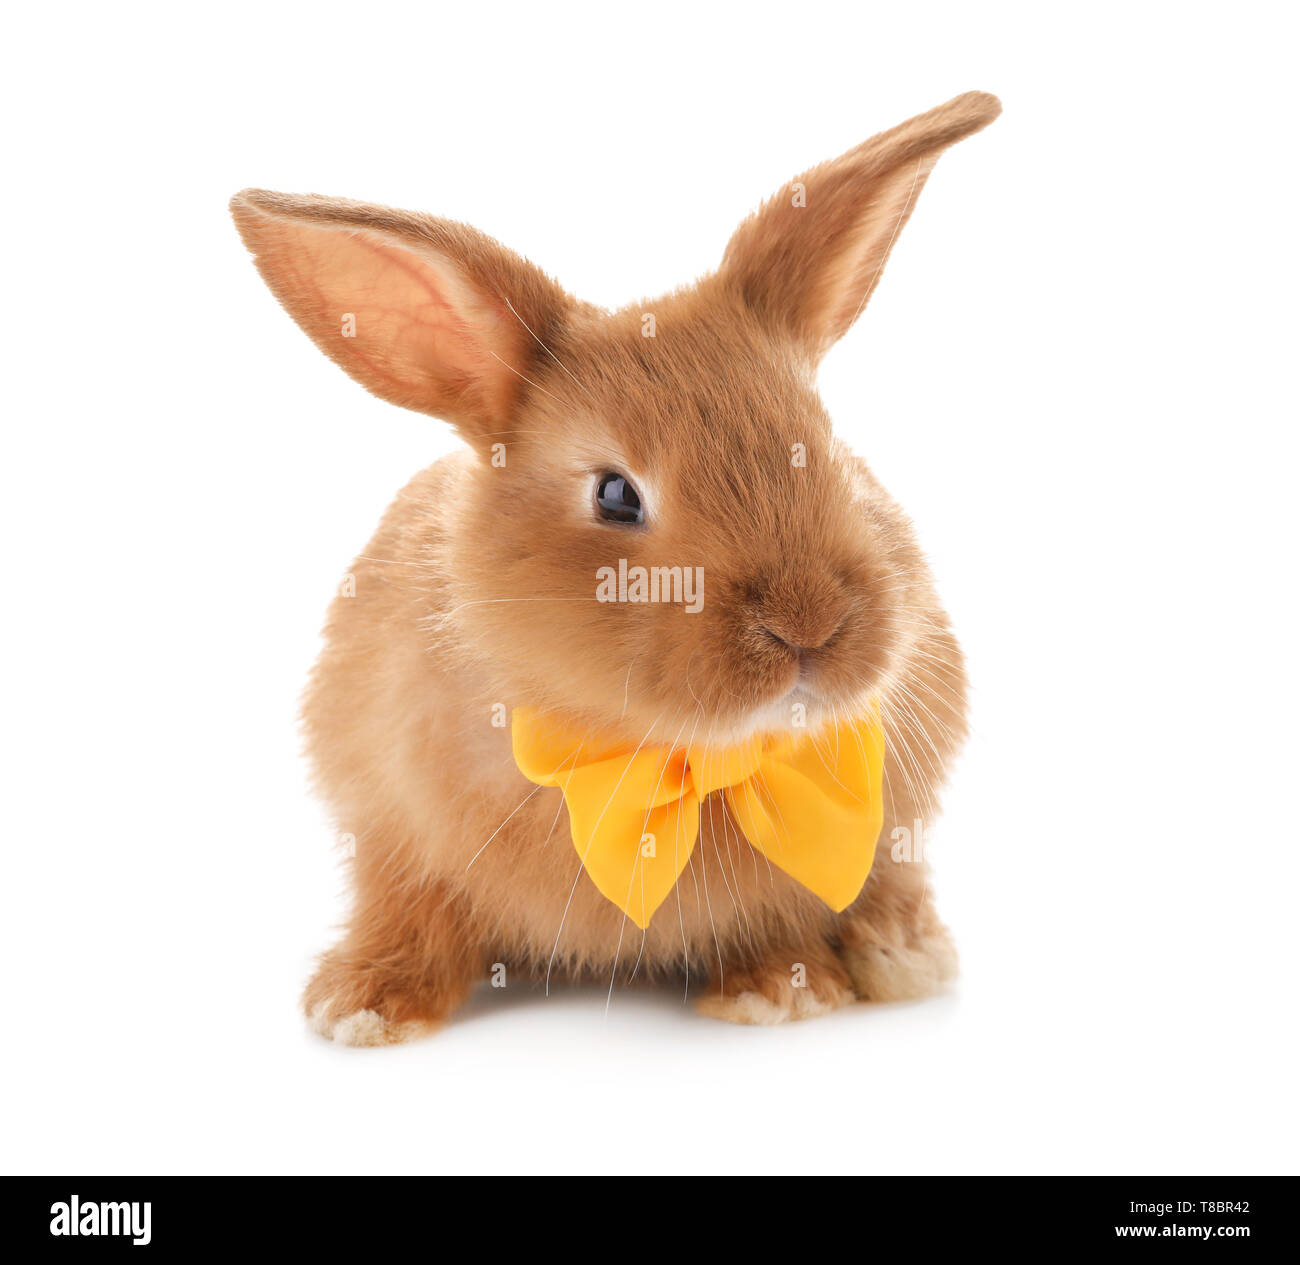 Cute fluffy bunny with bow tie on white background Stock Photo - Alamy